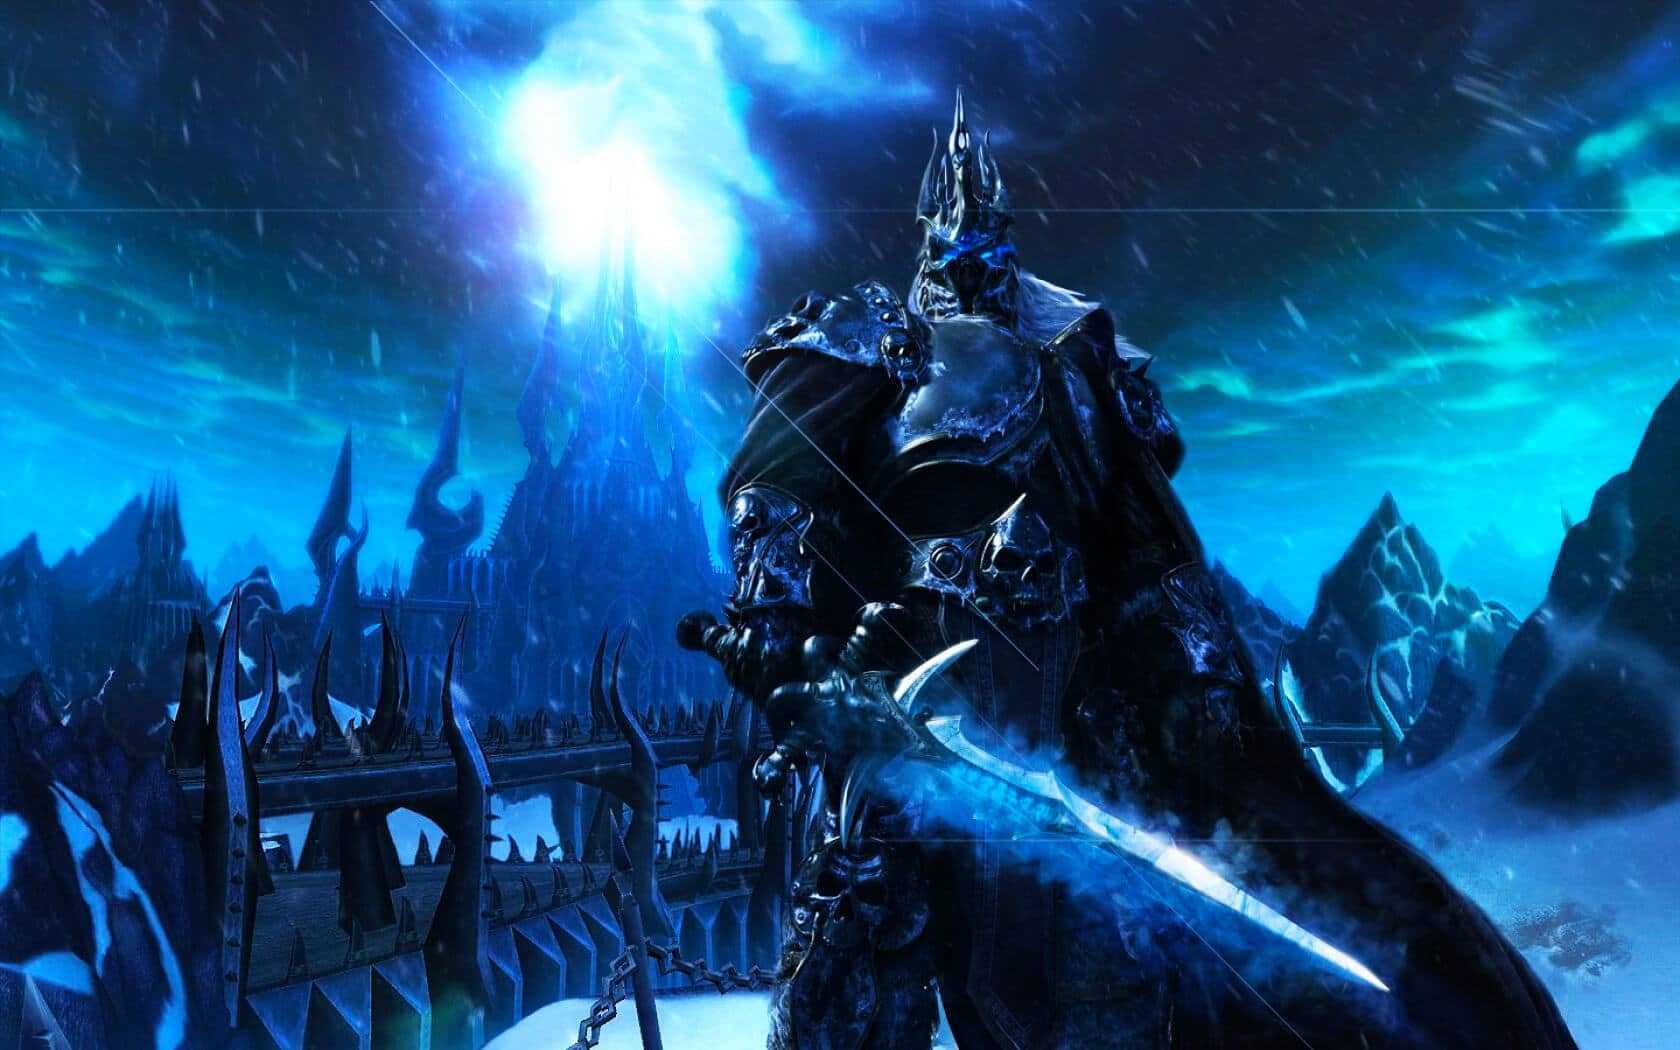 World of Warcraft: Wrath of the lich King